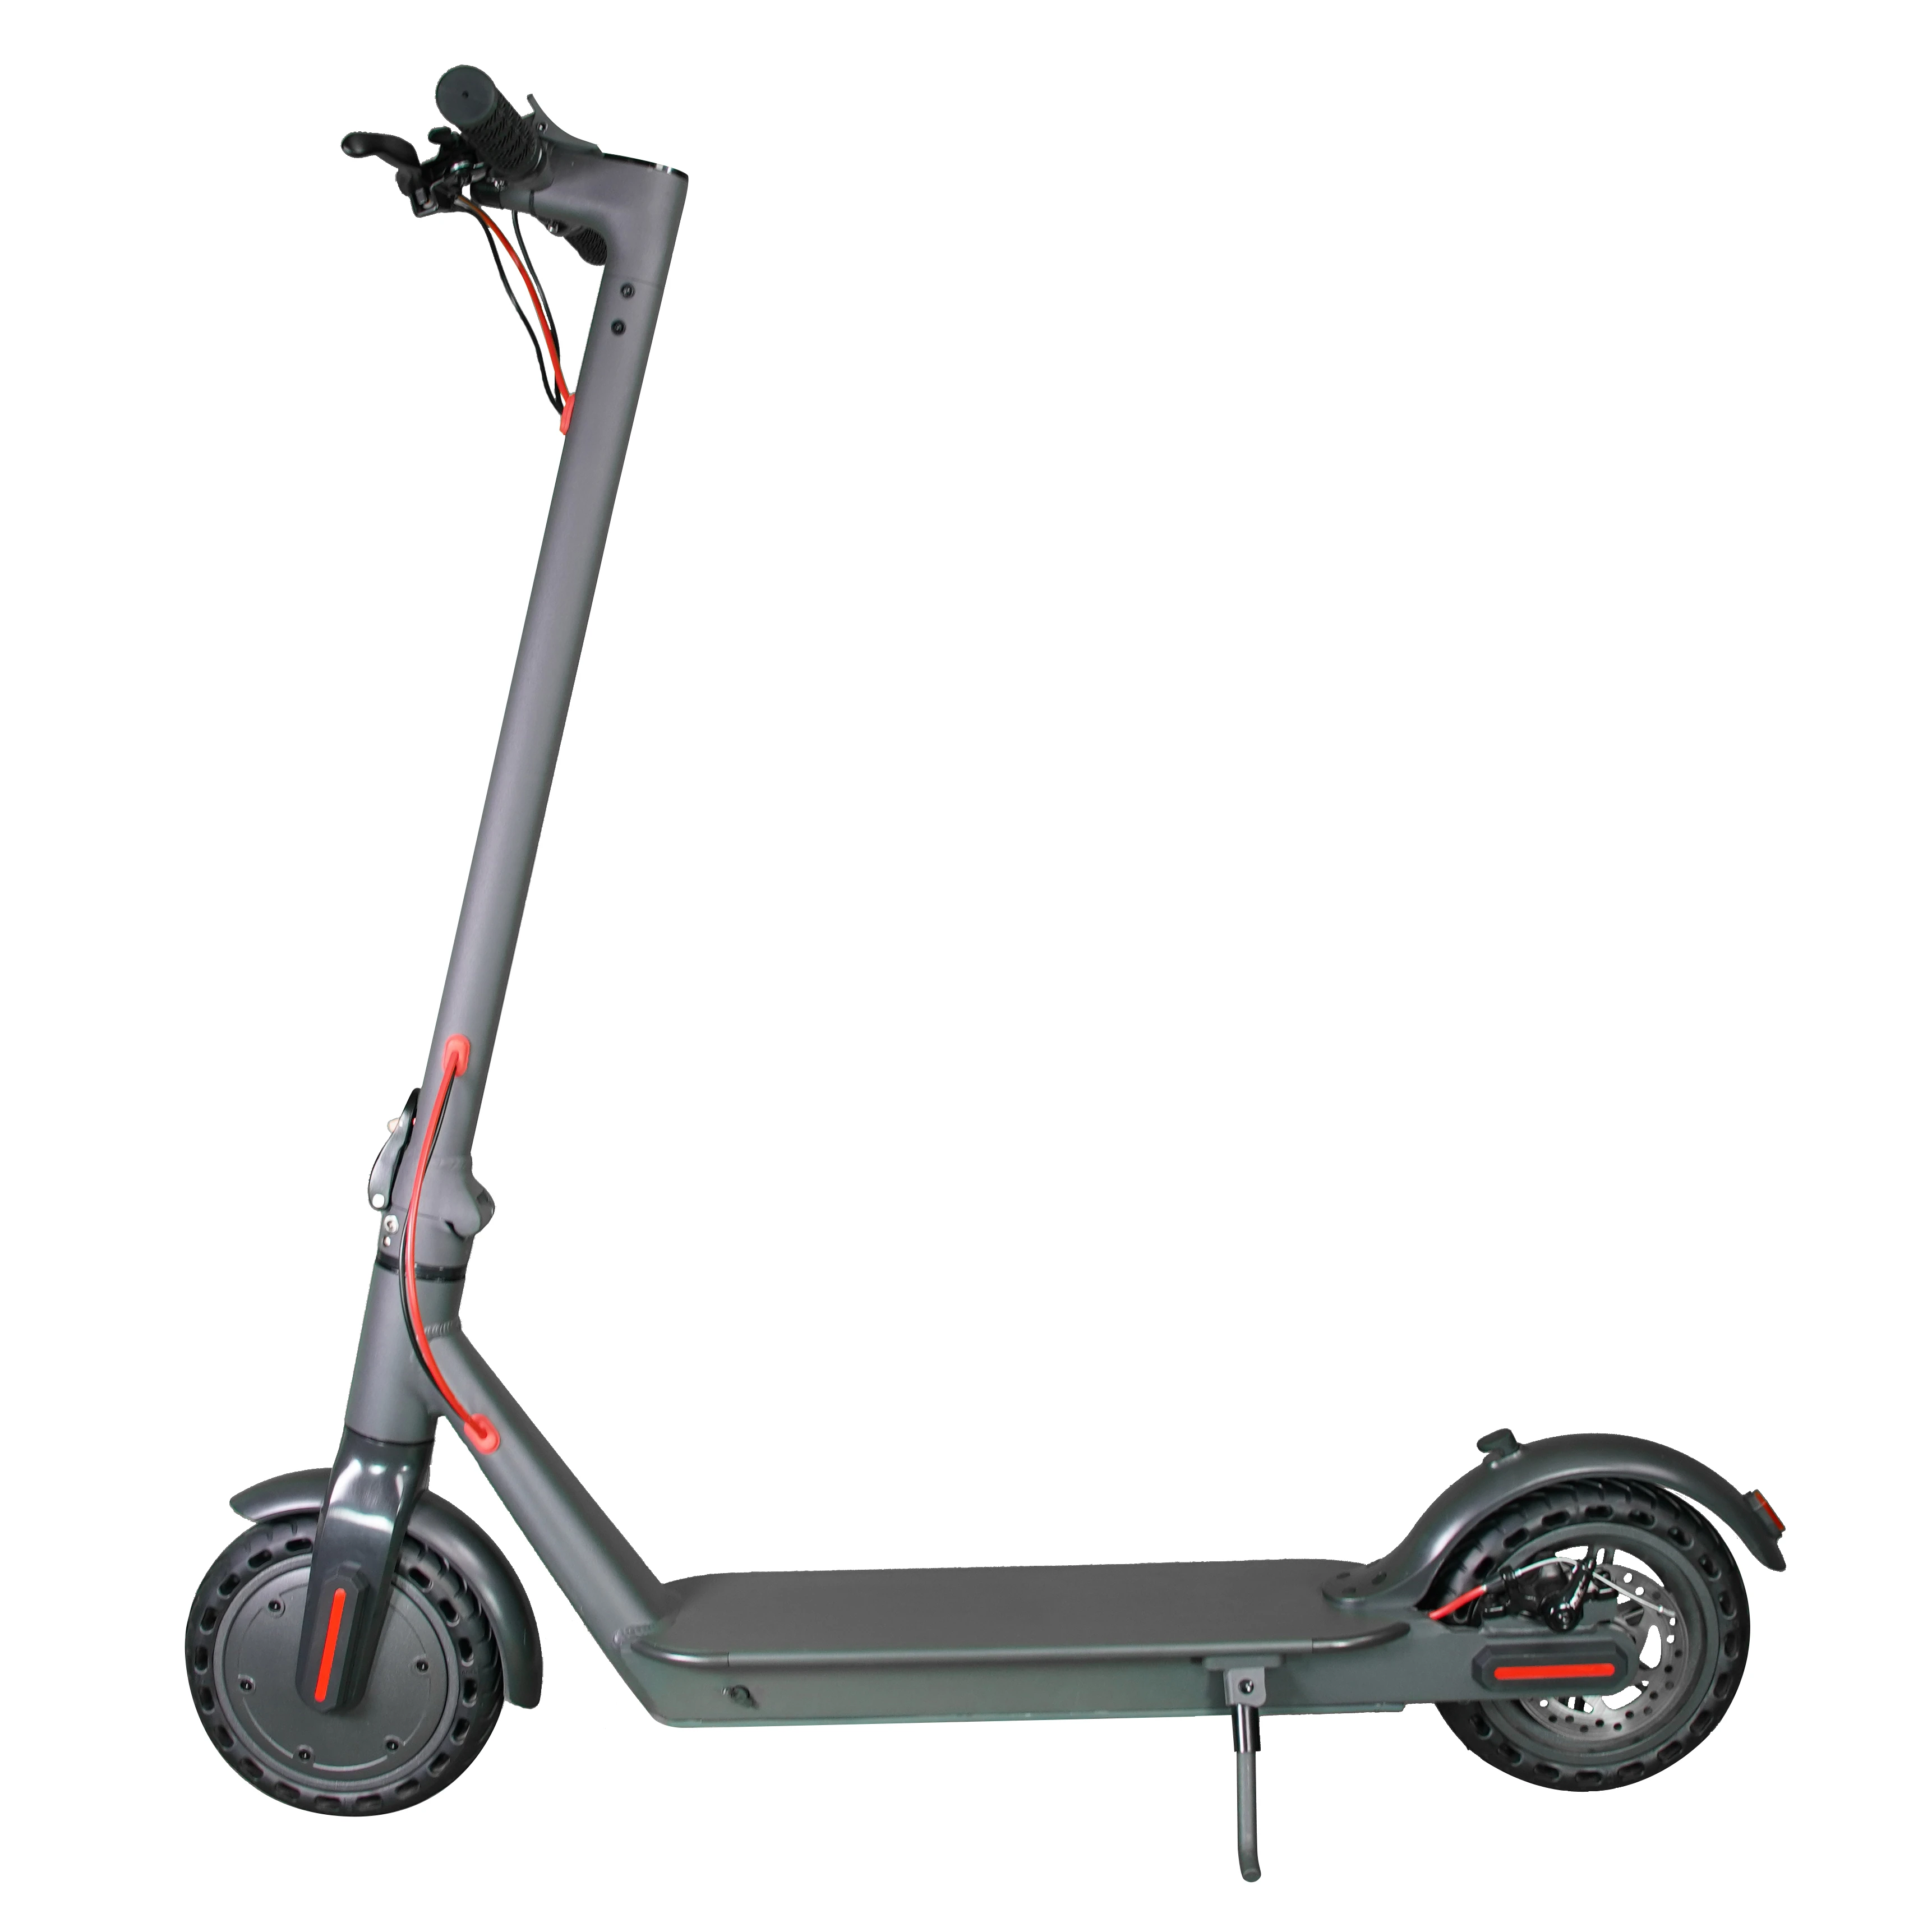 

ASKMY 2020 New Arrivals in European warehouse 350w City Folding Electric scooter